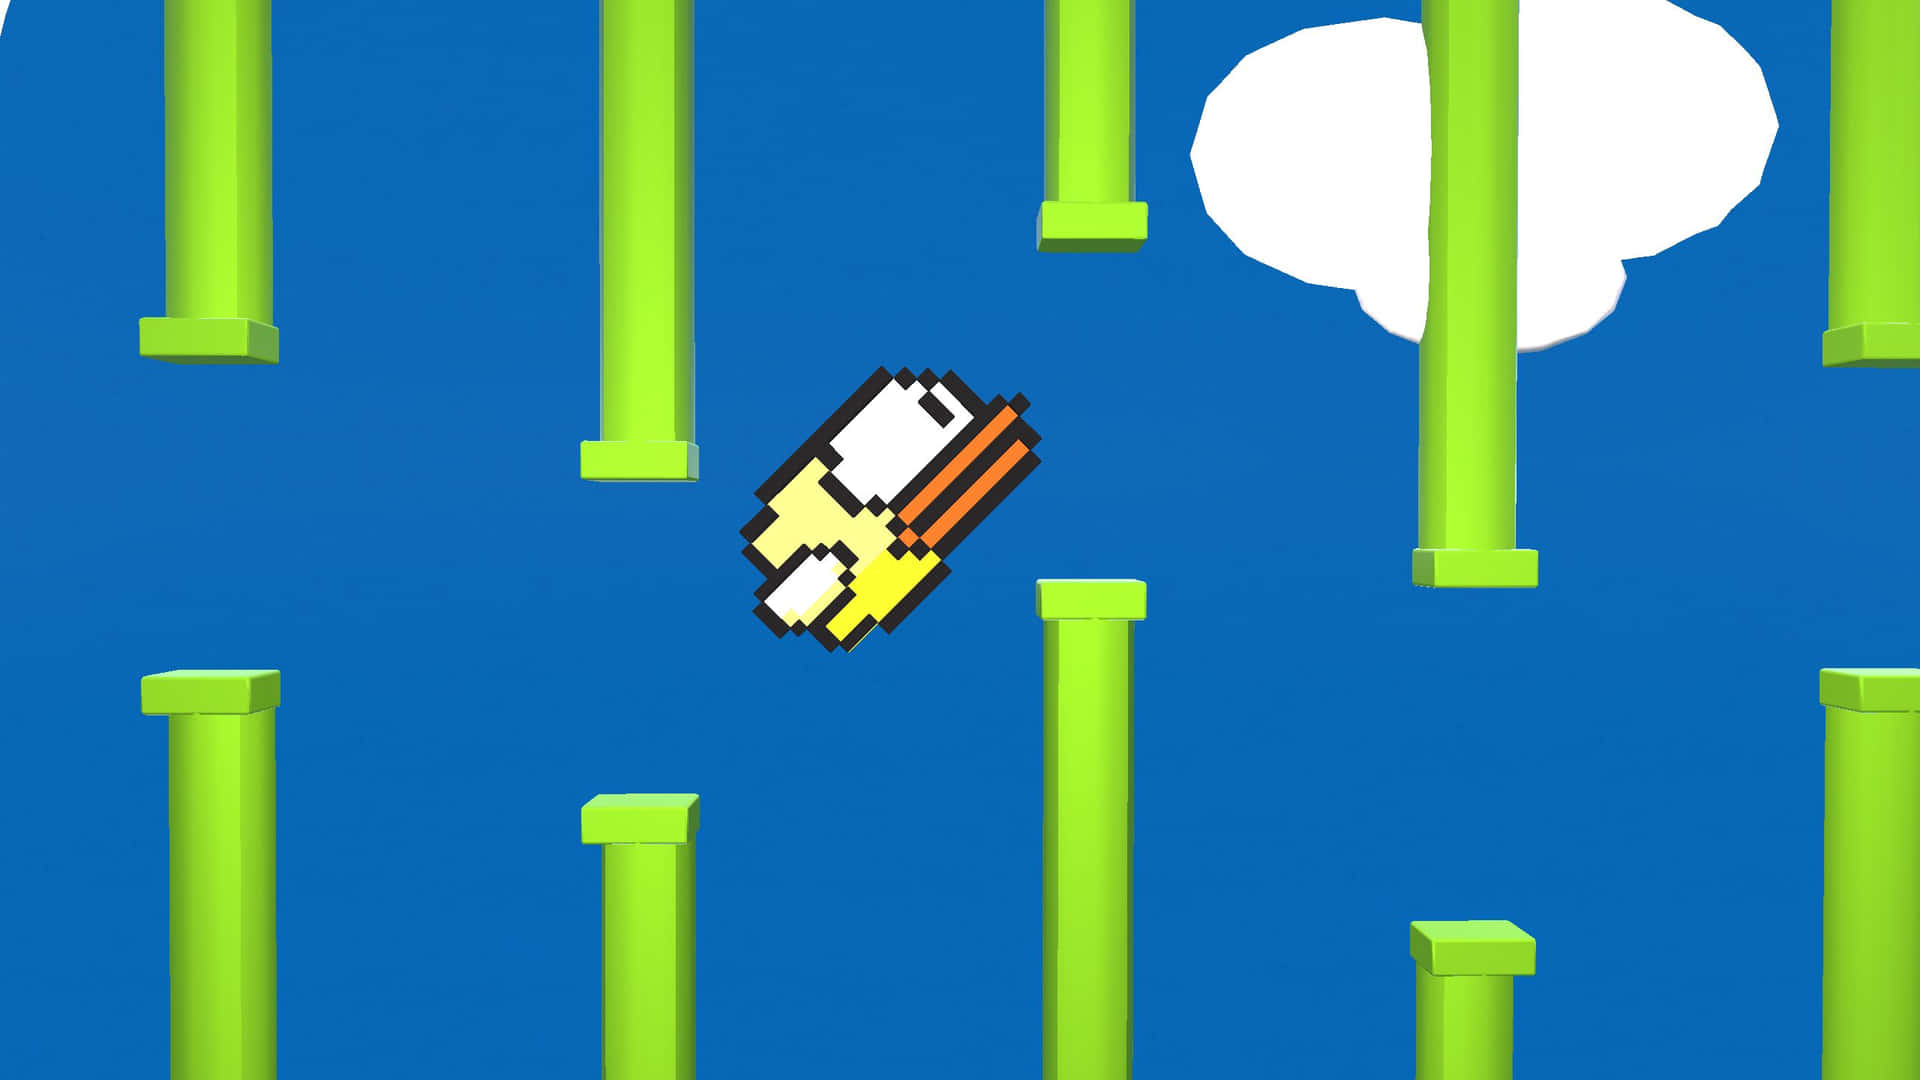 A Game With A Bird Flying Over A Blue Sky